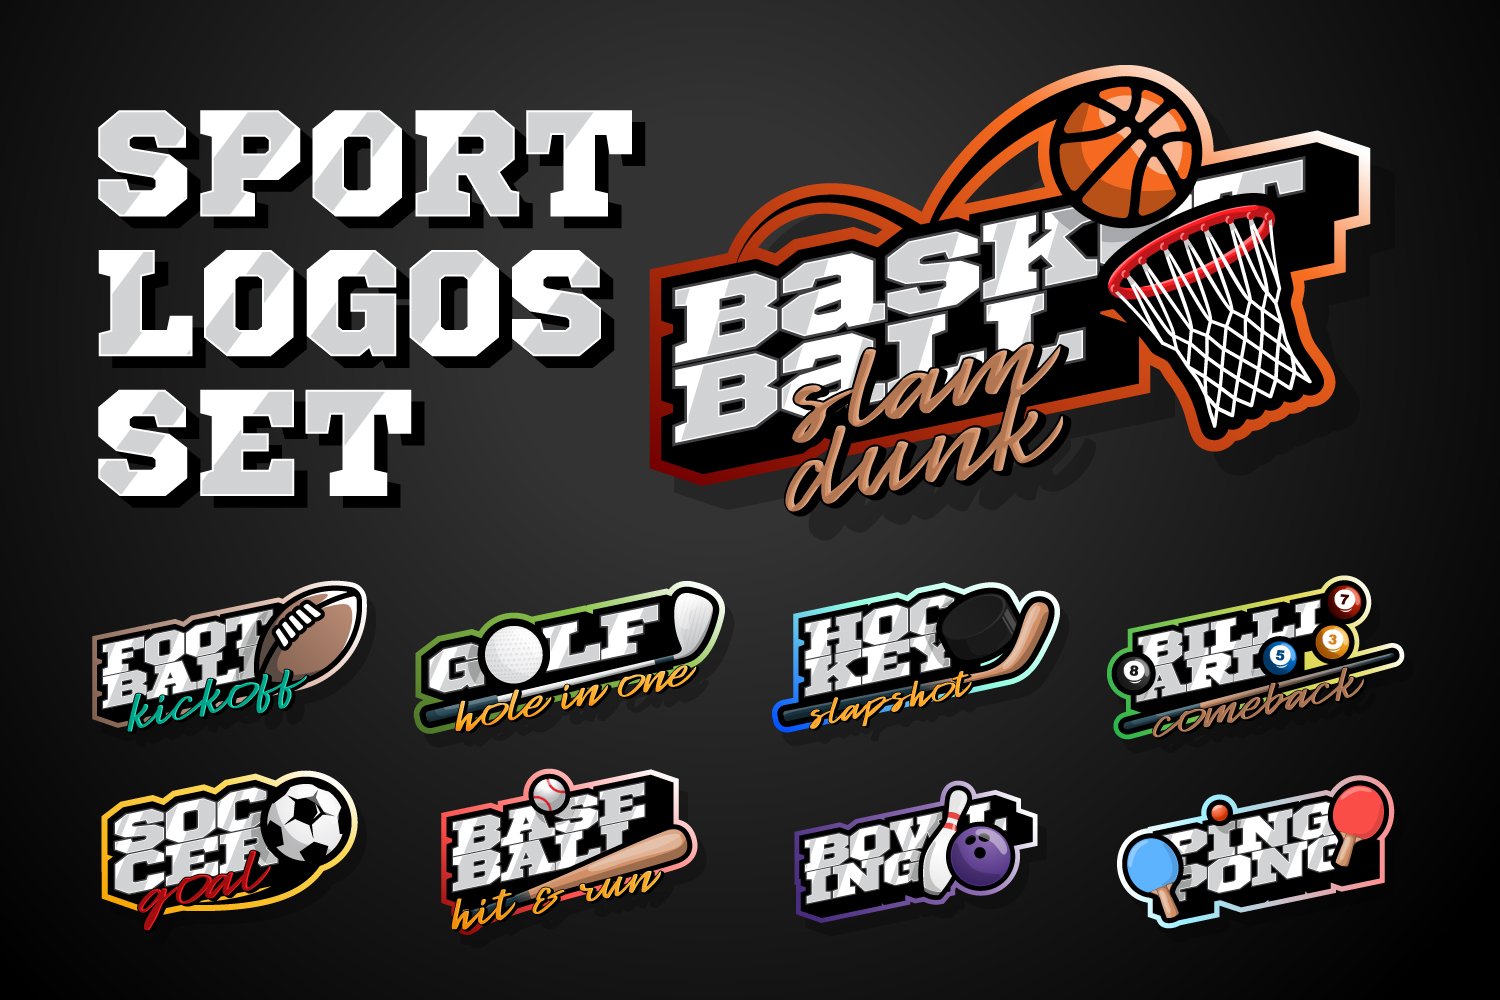 Logo of sports teams with their attributes - racket, basketball hoop, ball, etc.